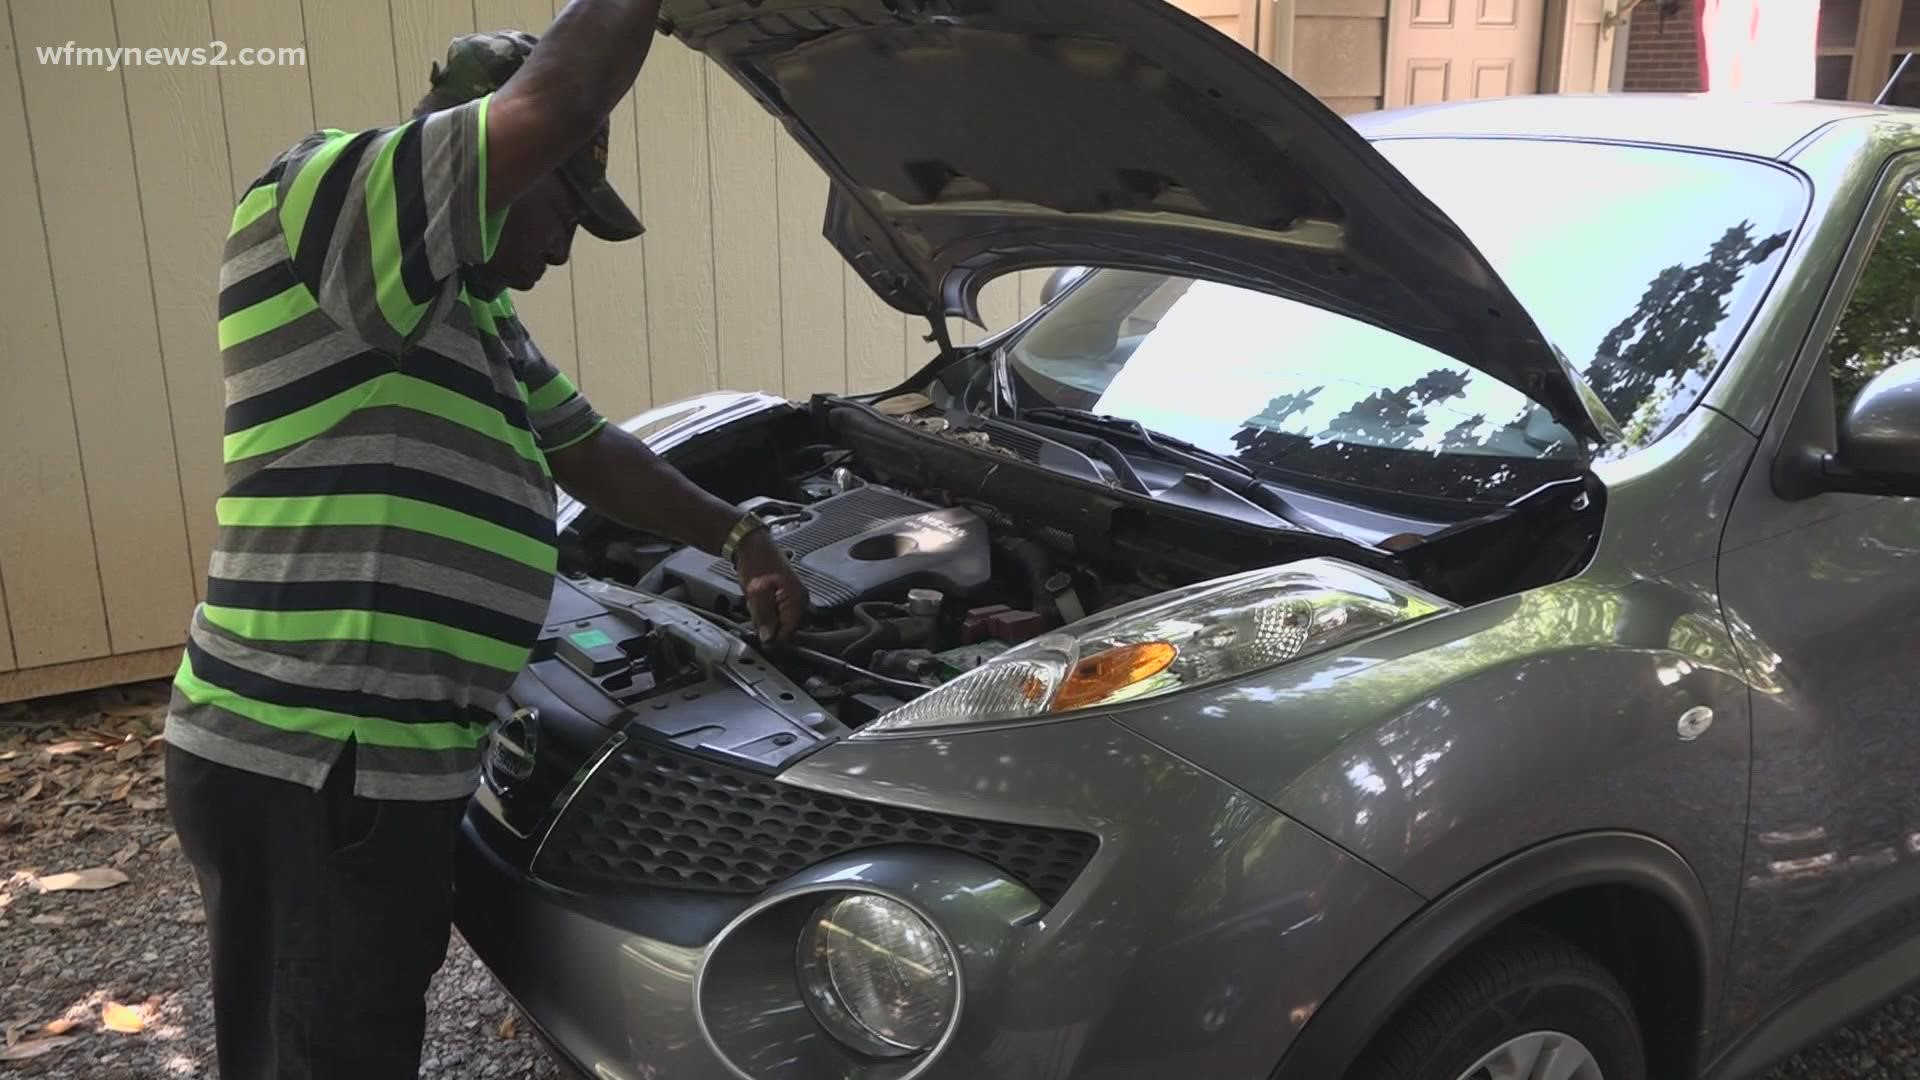 It's worse than nails on a chalkboard - your car makes a bad noise. George Smith found out his car's noise was a $7,000 problem.